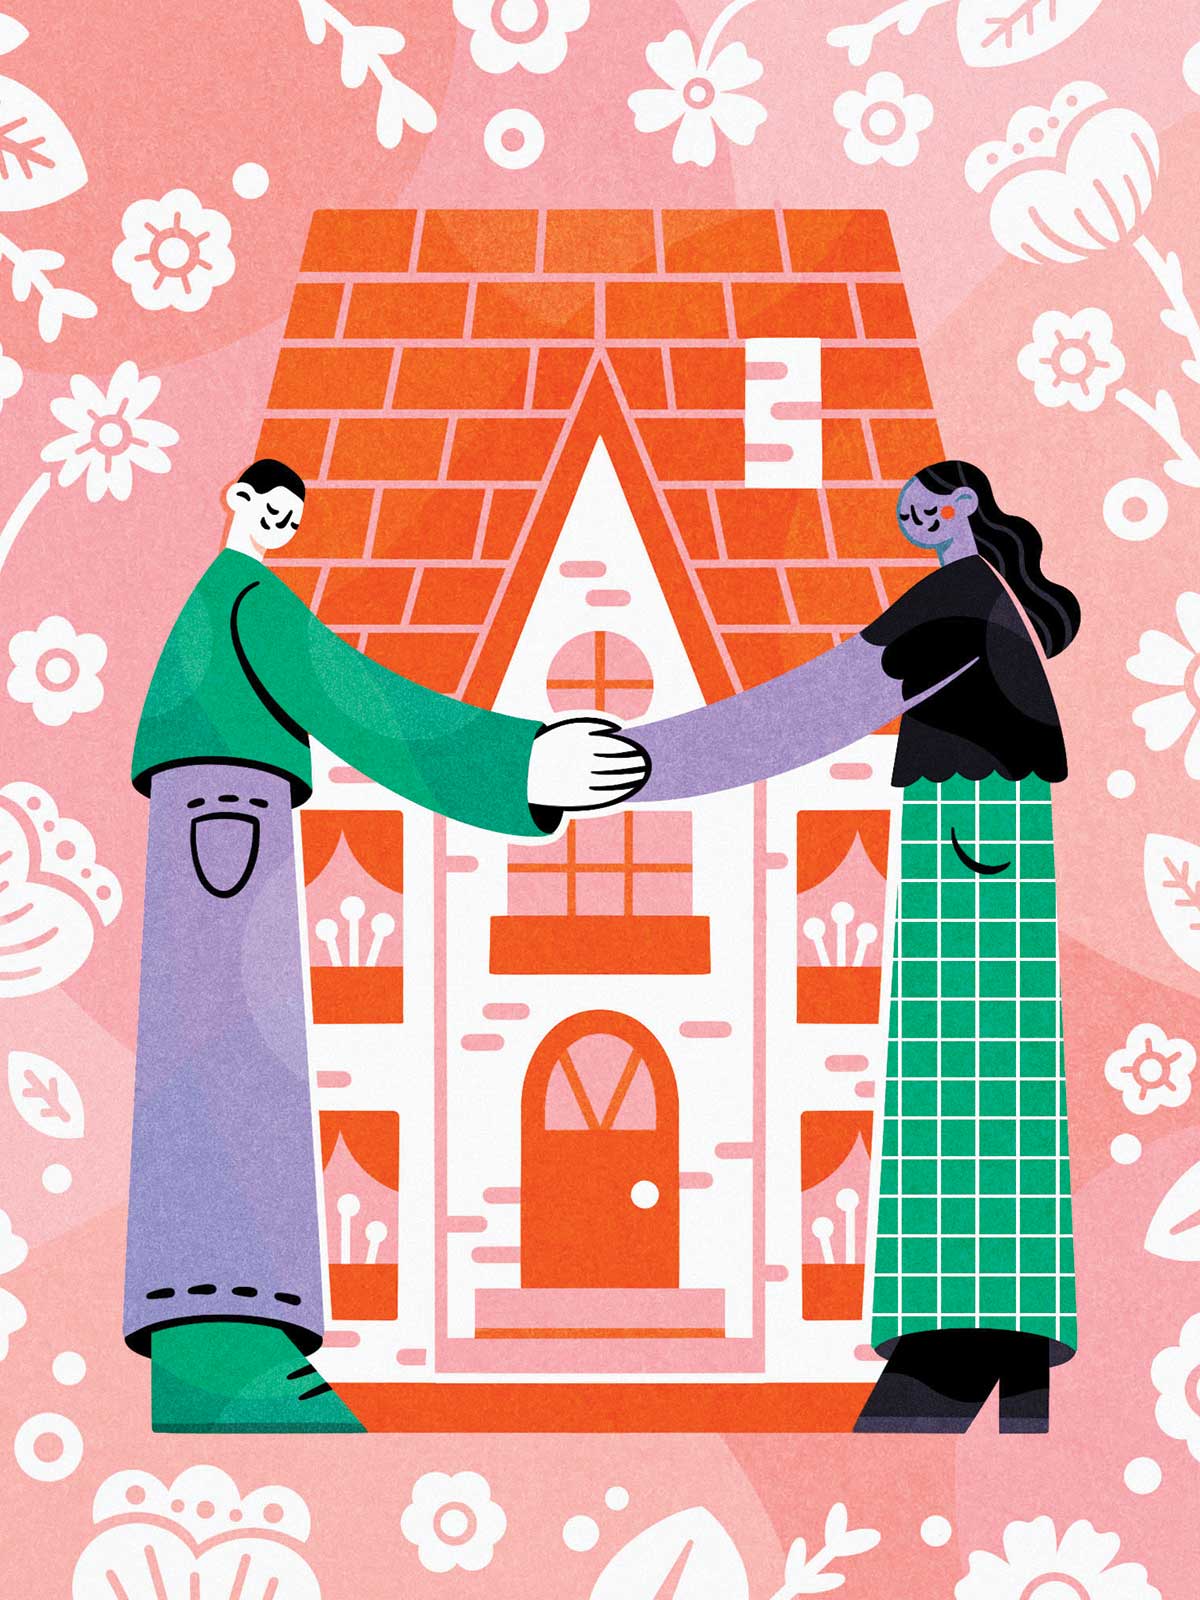 whimsical folk art illustration of man and woman in front of house